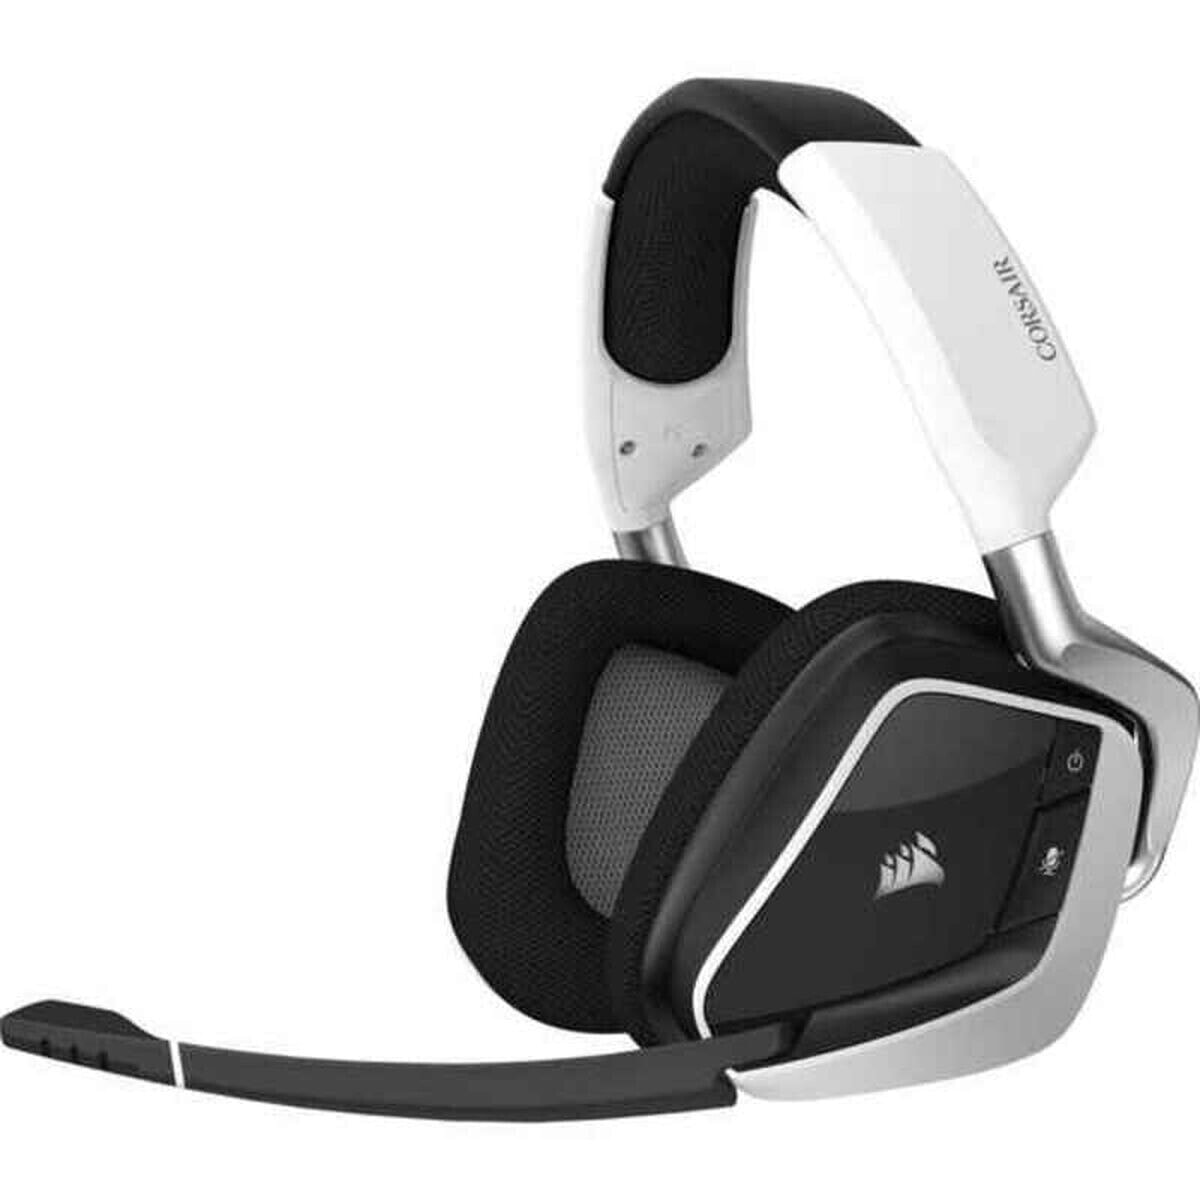 Bluetooth Headset with Microphone Corsair Void Elite White (Refurbished A)